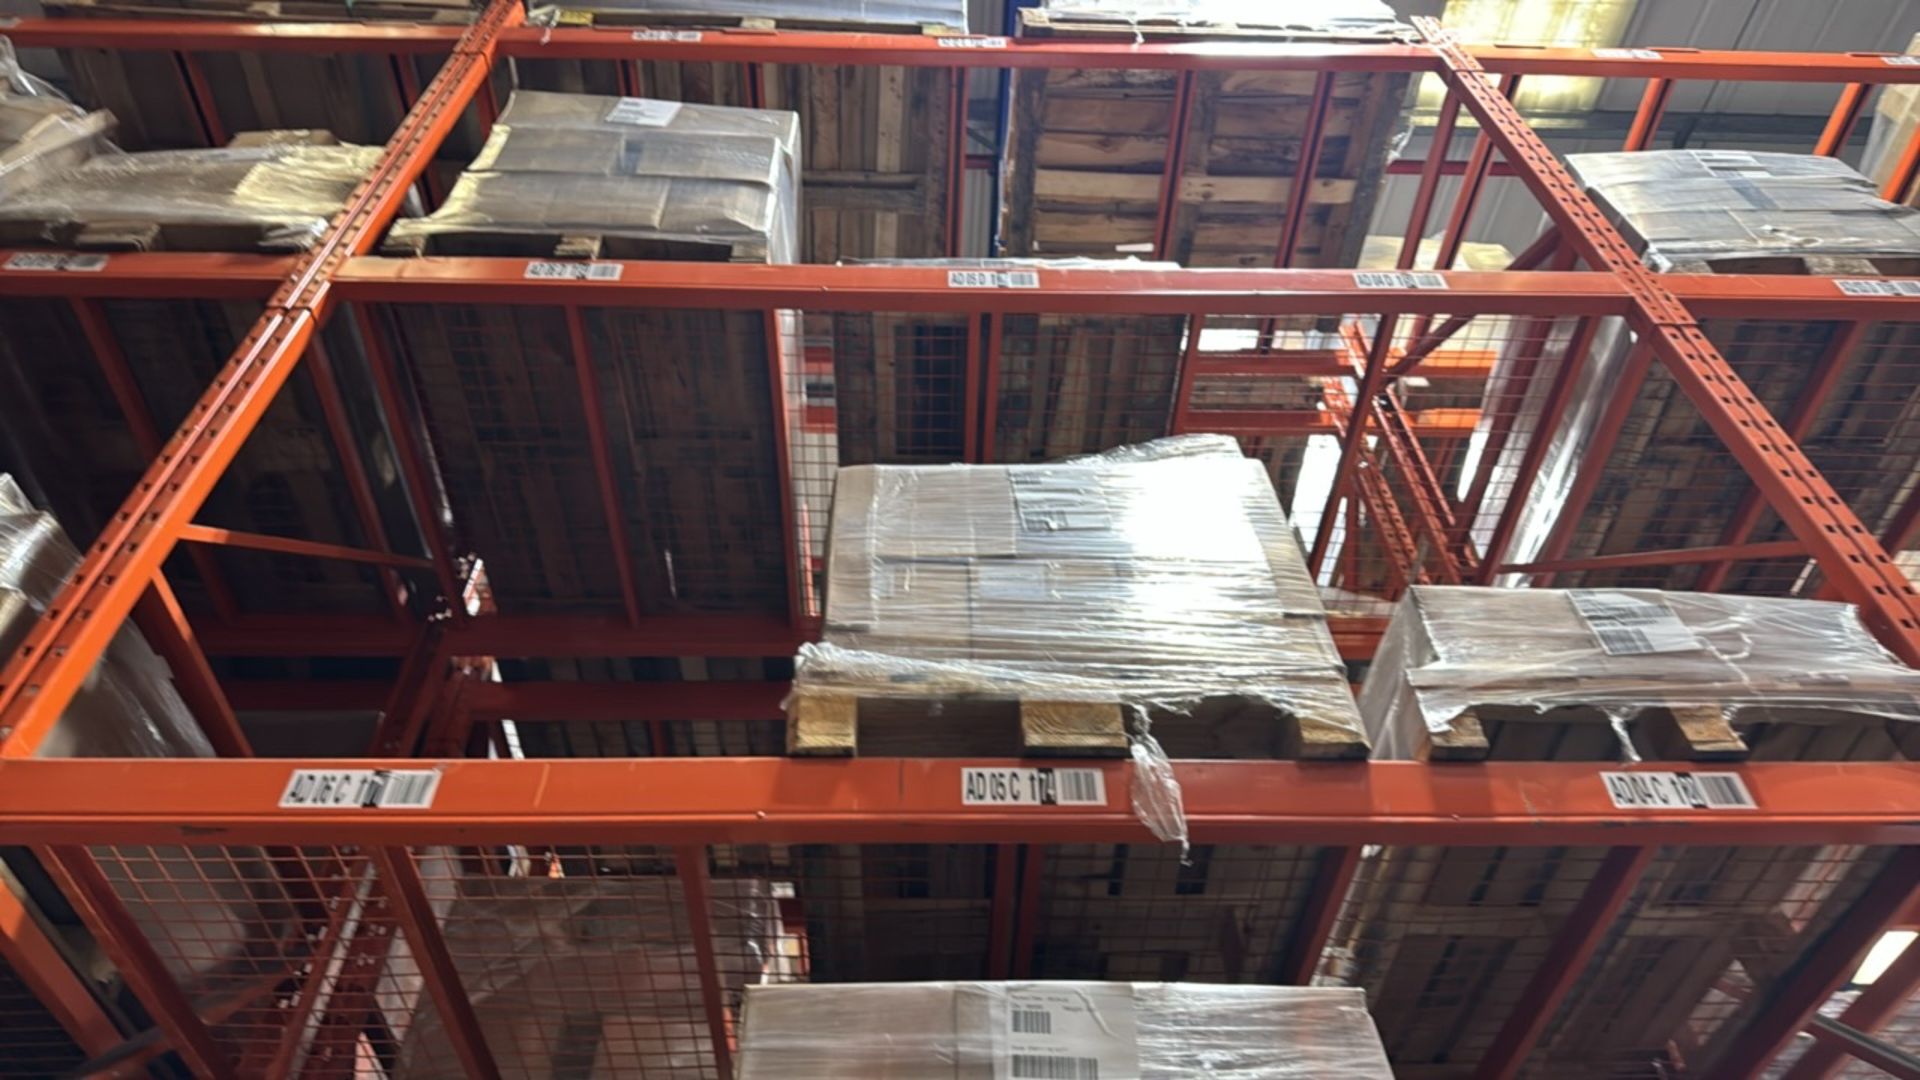 ref 6 - 23 Bays Of Boltless Pallet Racking - Image 5 of 9